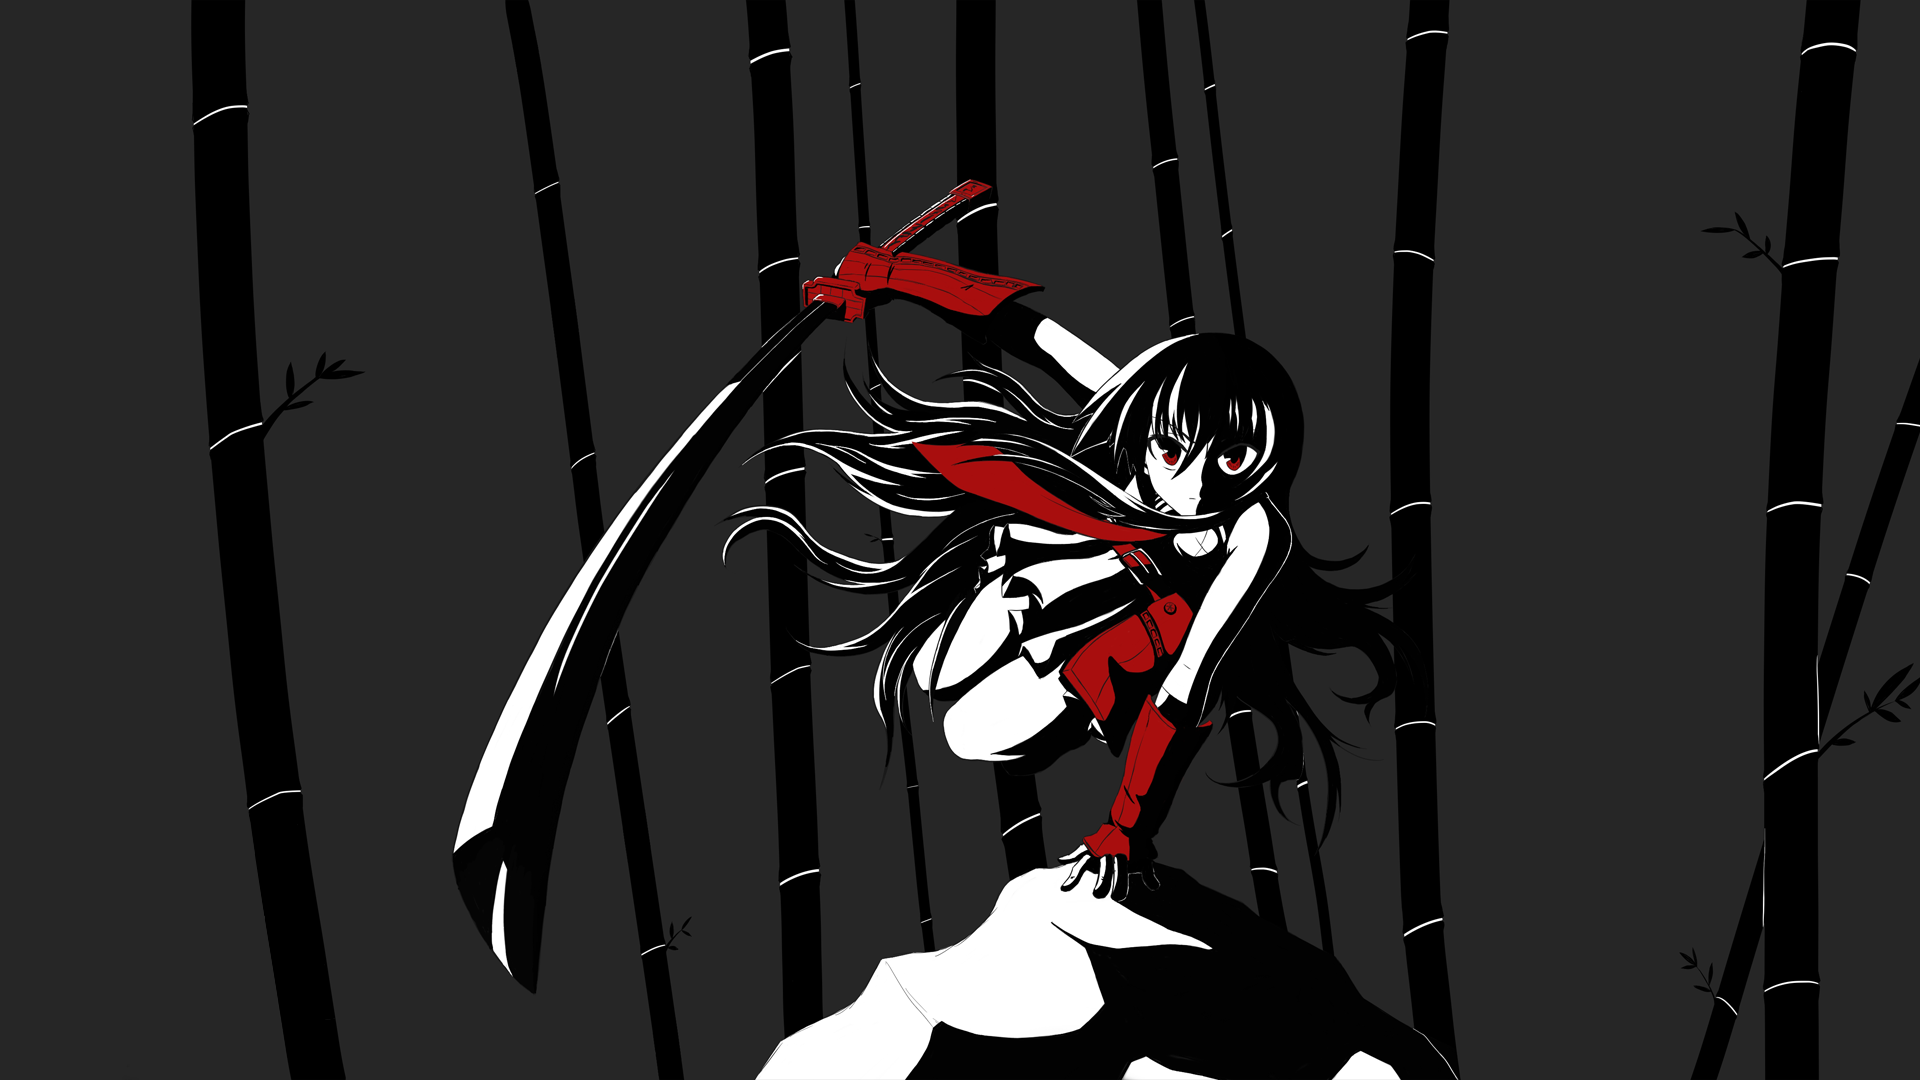 41 Akame Ga Kill Wallpapers for iPhone and Android by James Thomas MD